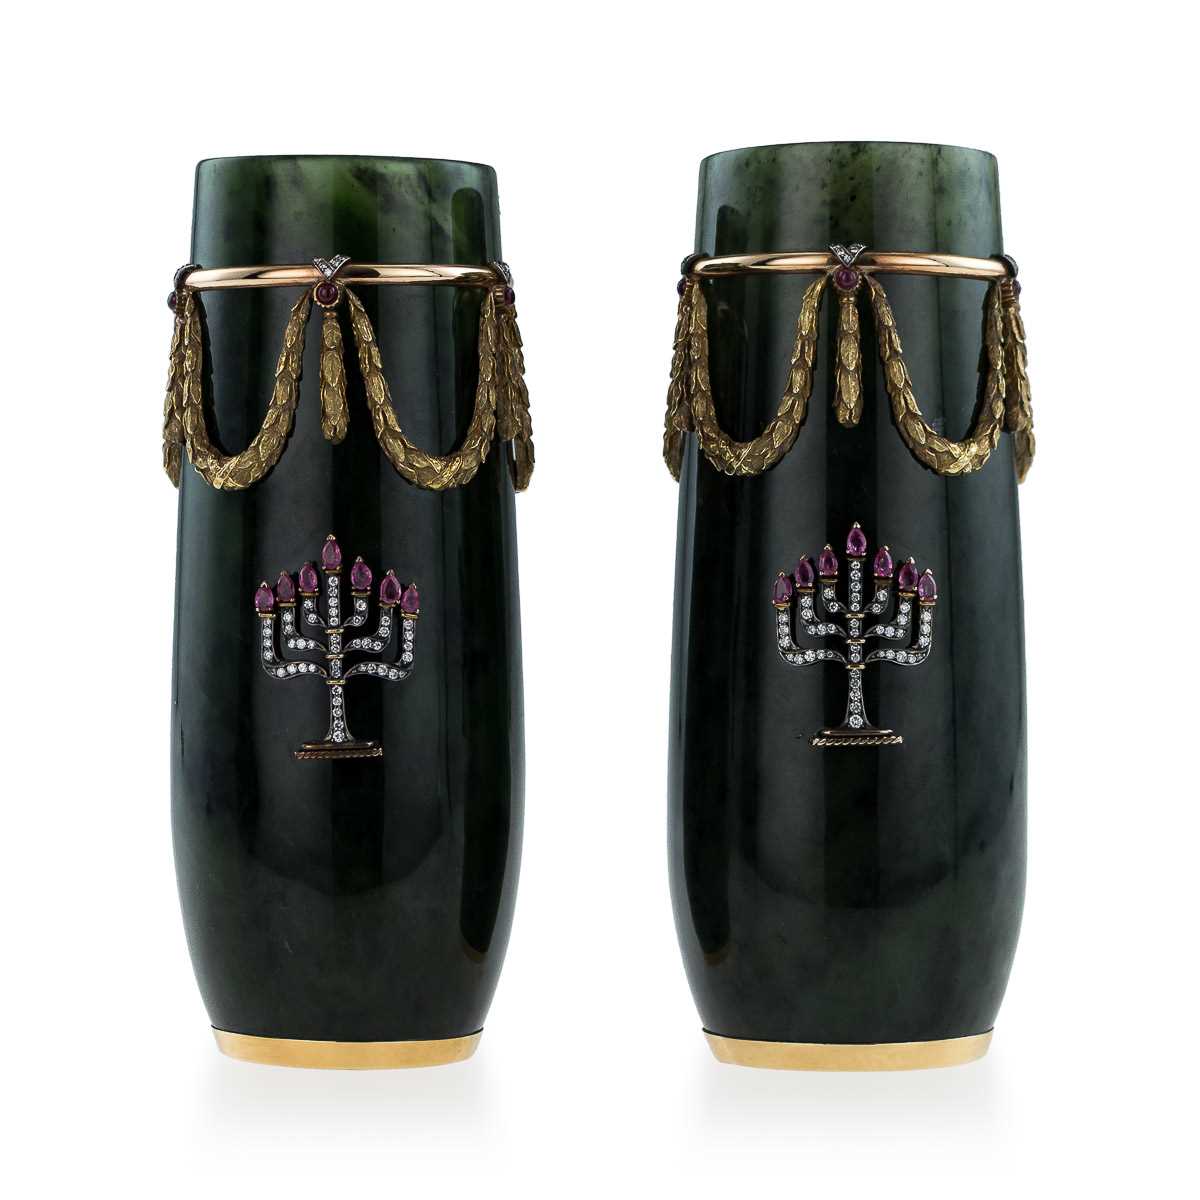 A PAIR 14K GOLD, NEPHRITE, DIAMOND AND RUBY ENCRUSTED VASES IN THE STYLE OF FABERGE - Image 15 of 28